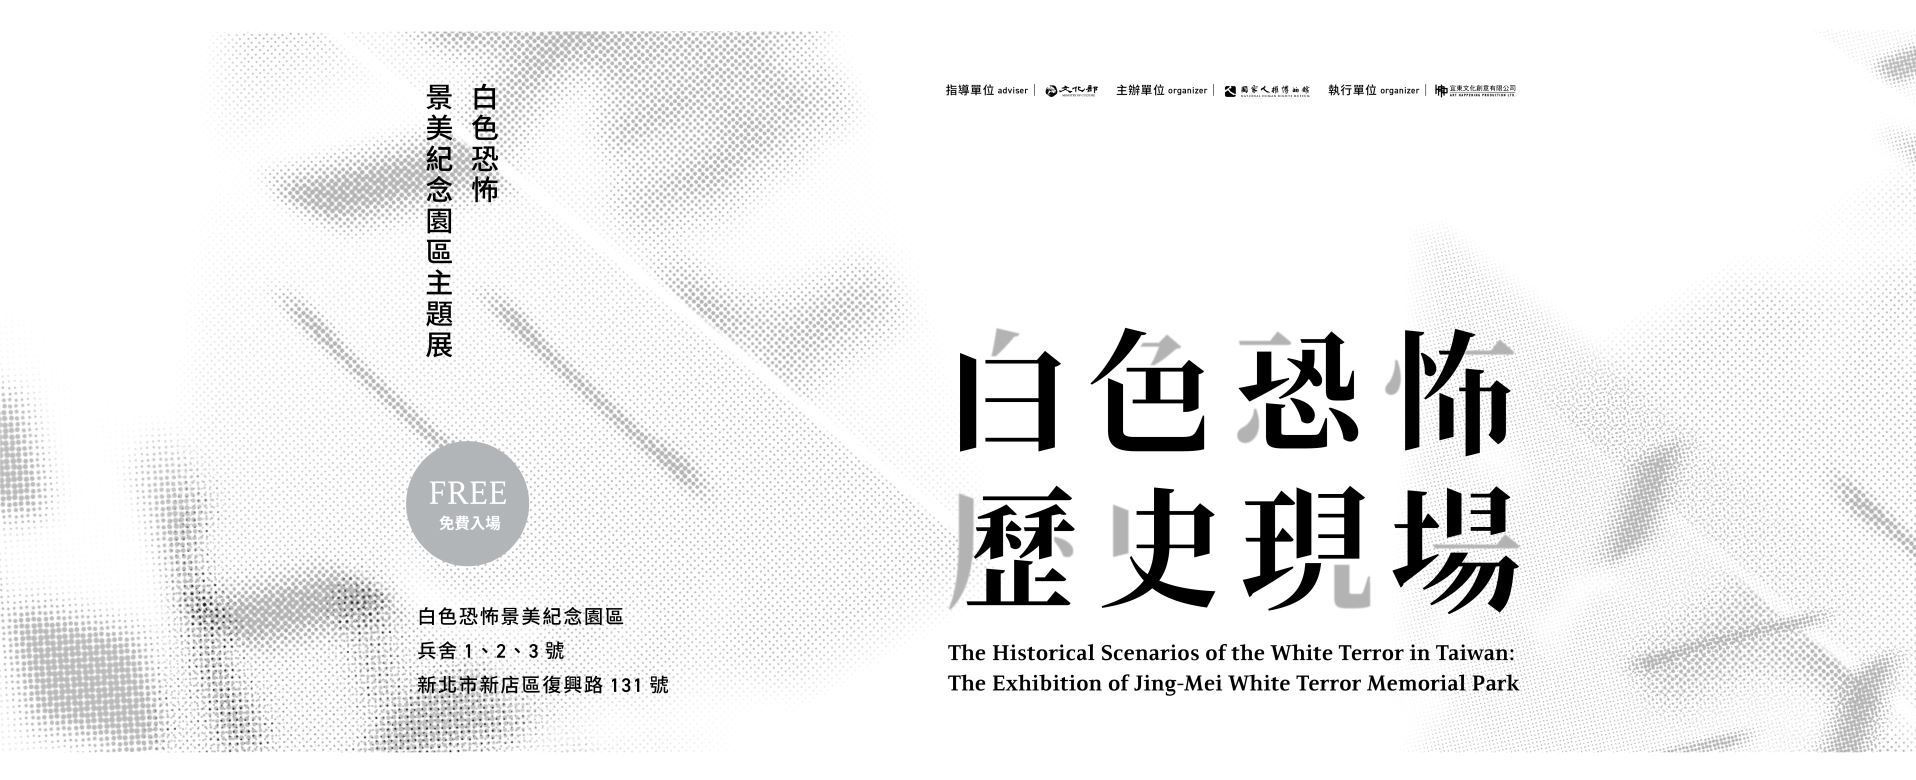 The Historical Scenarios of the White Terror in Taiwan: The Exhibition on Jing-Mei White Terror Memorial Park